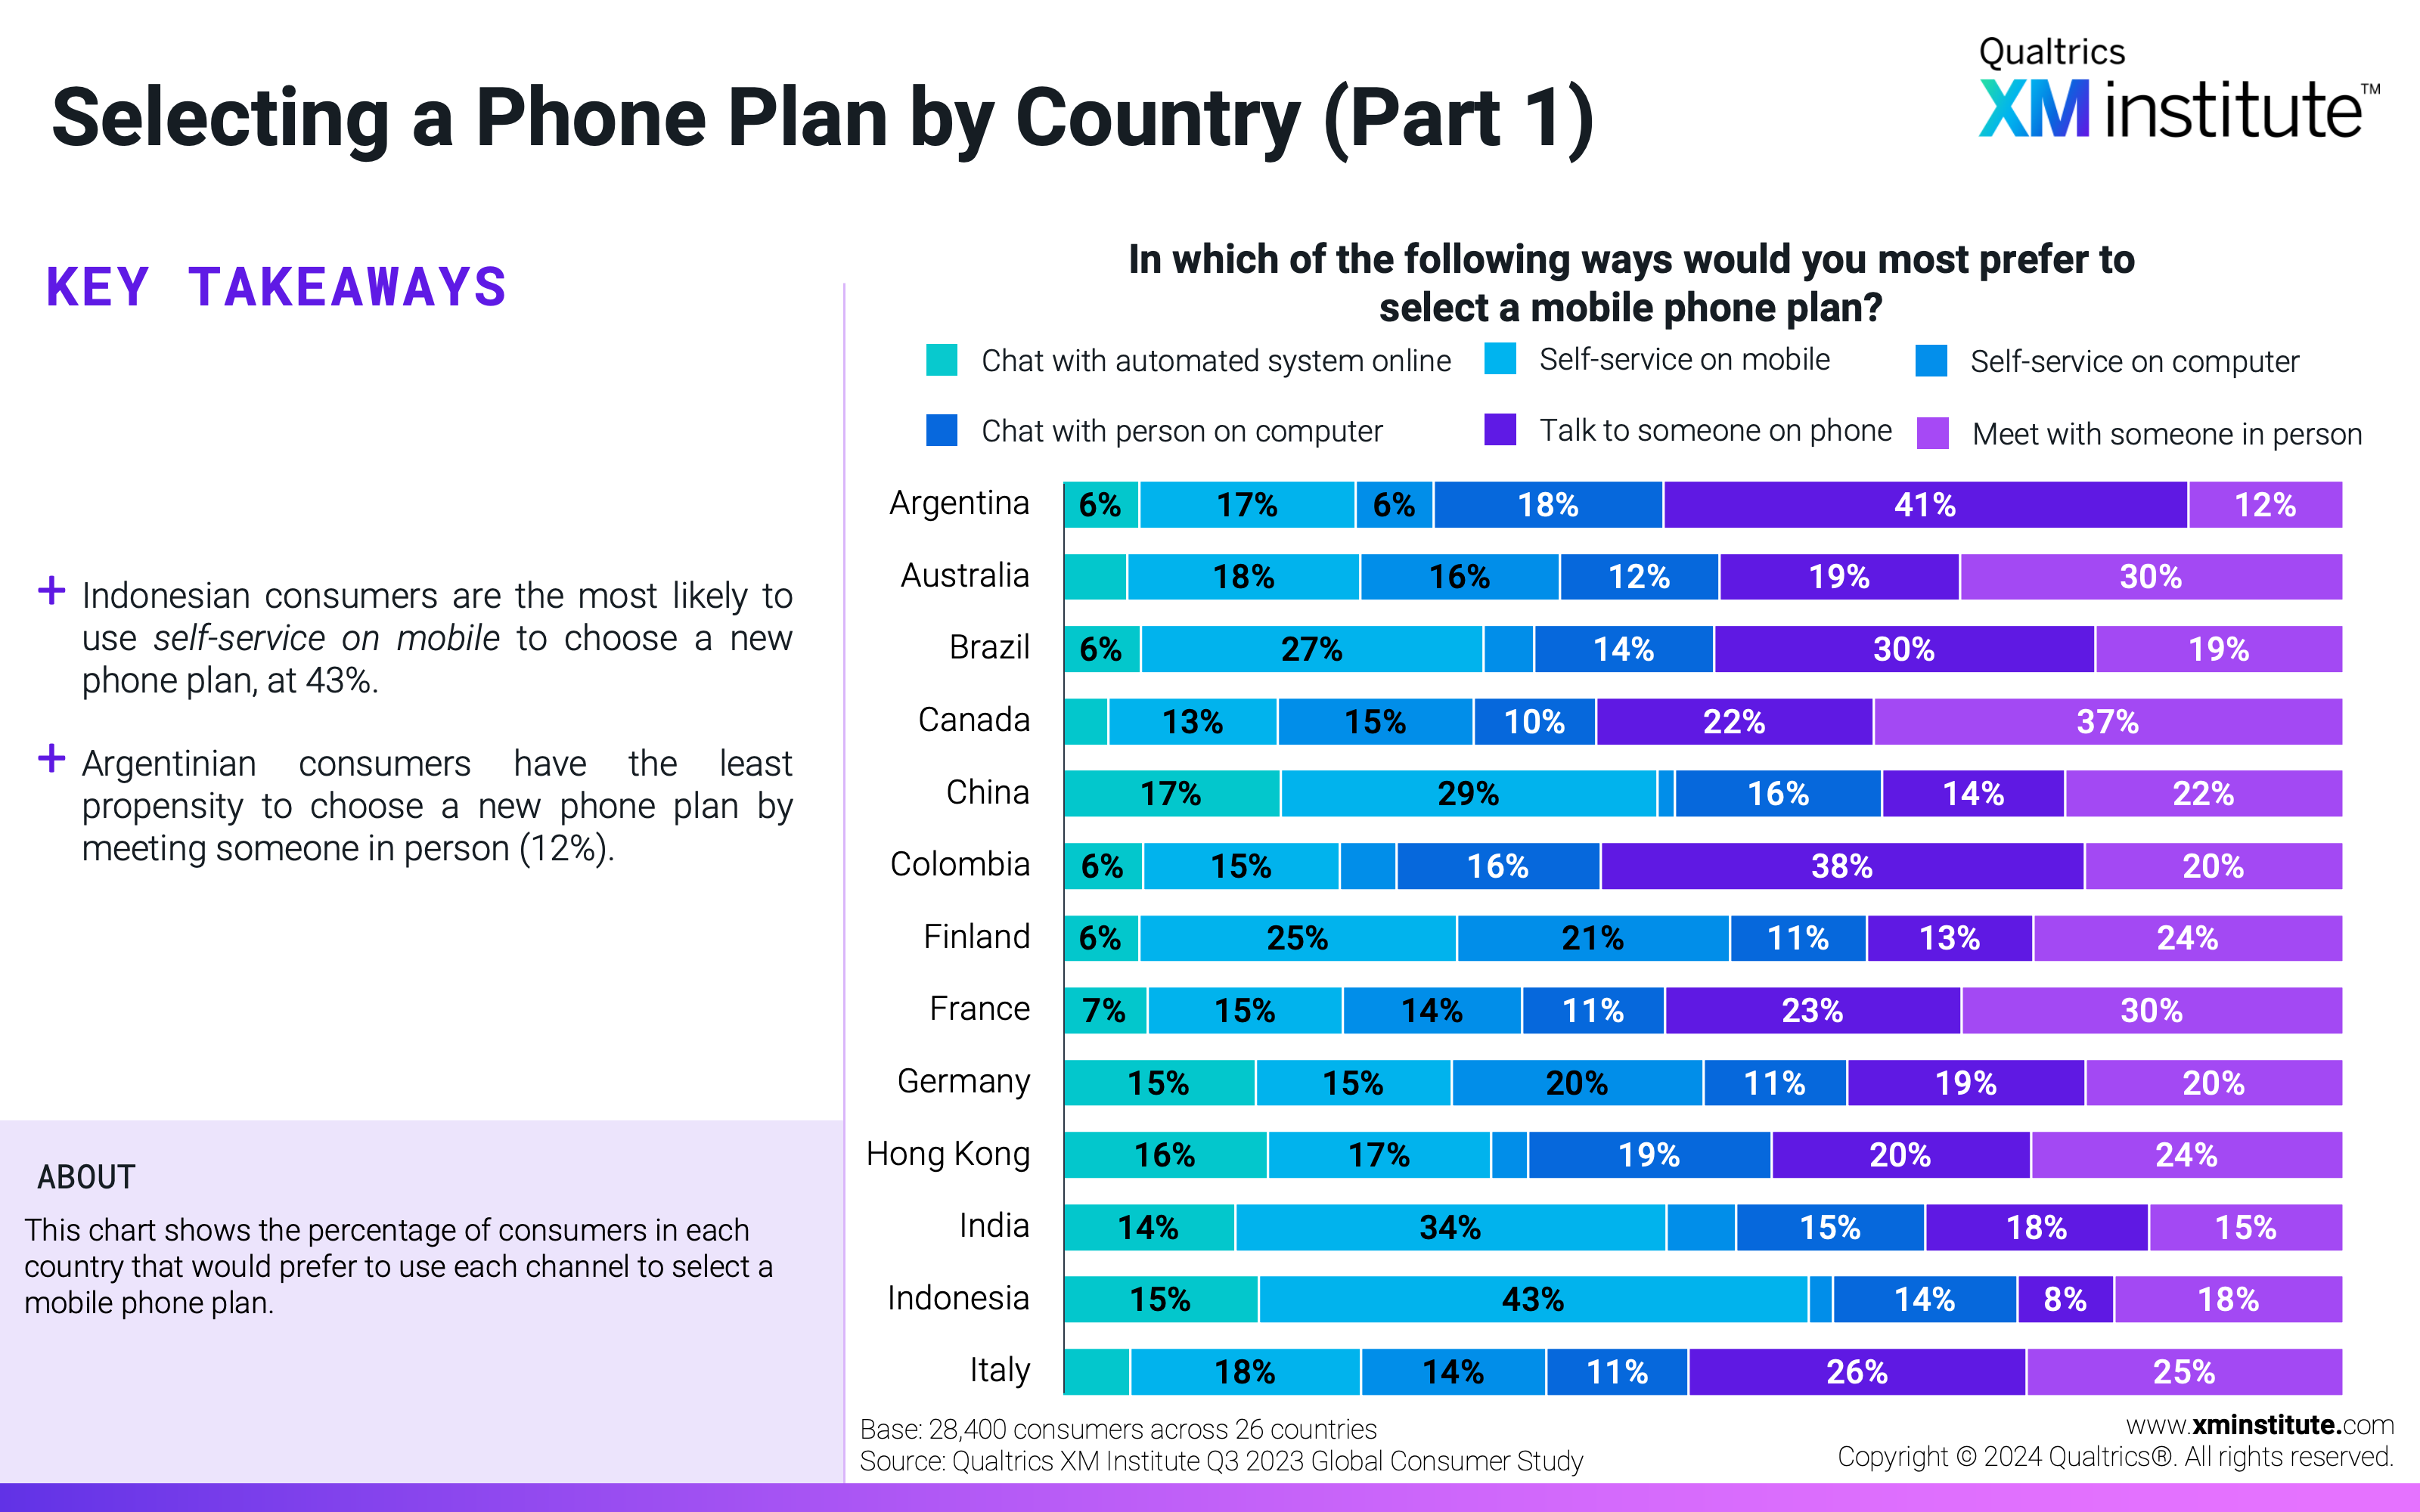 This chart shows the percentage of consumers in each country that would prefer to use each channel to select a mobile phone plan. 